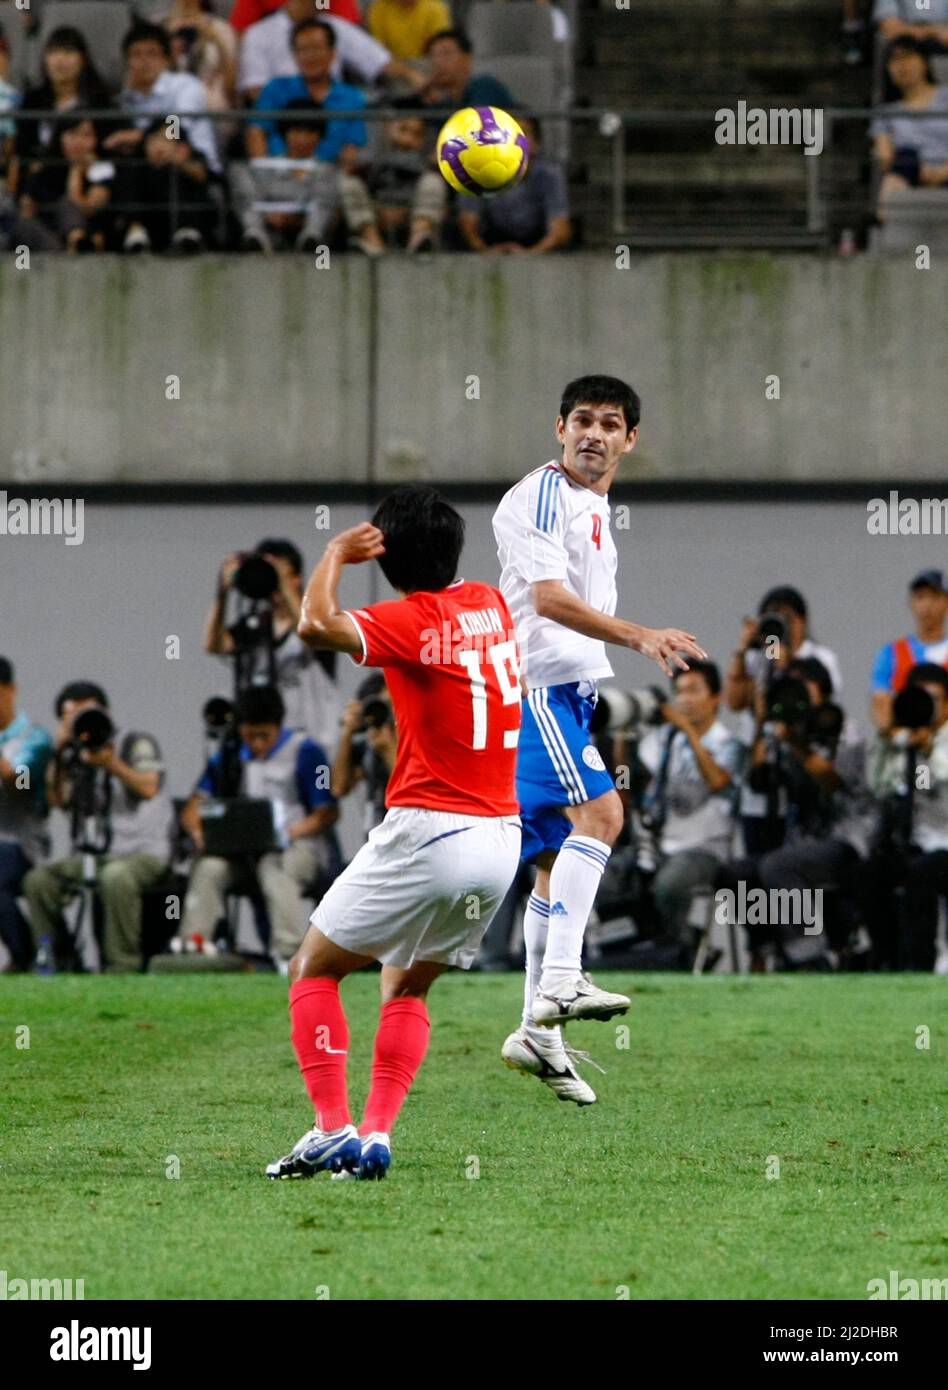 Aug 12, 2009-Seoul, South Korea-Yeom Ki-Hun(front), South Korea, and Denis Caniza, Paraguay, compete for the ball during the international friendly match between South Korea and Paraguay at Seoul Worldcup stadium on August 12, 2009 in Seoul, South Korea. Stock Photo